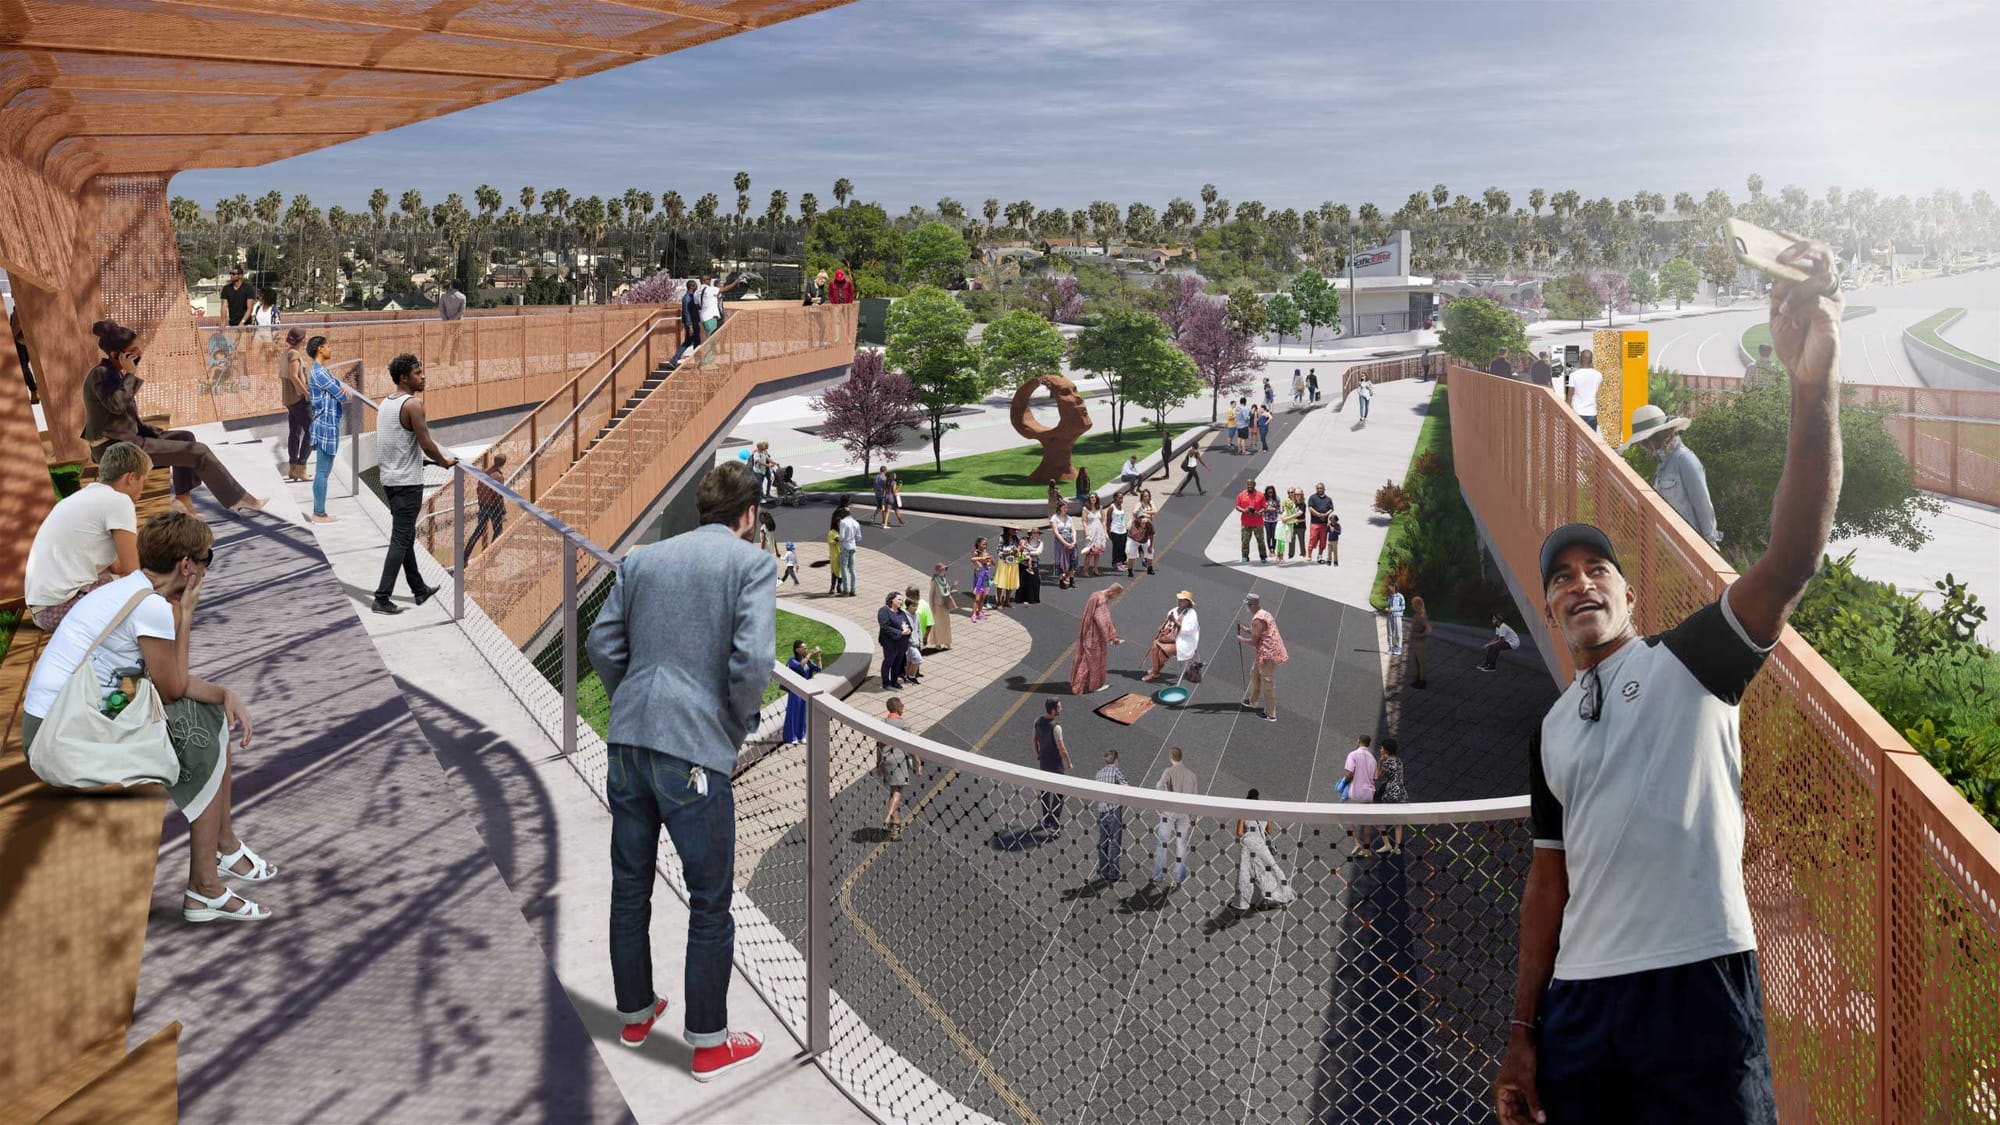 A rendering of Destination Crenshaw showing an elevated park over a large public plaza with people exploring the spaces